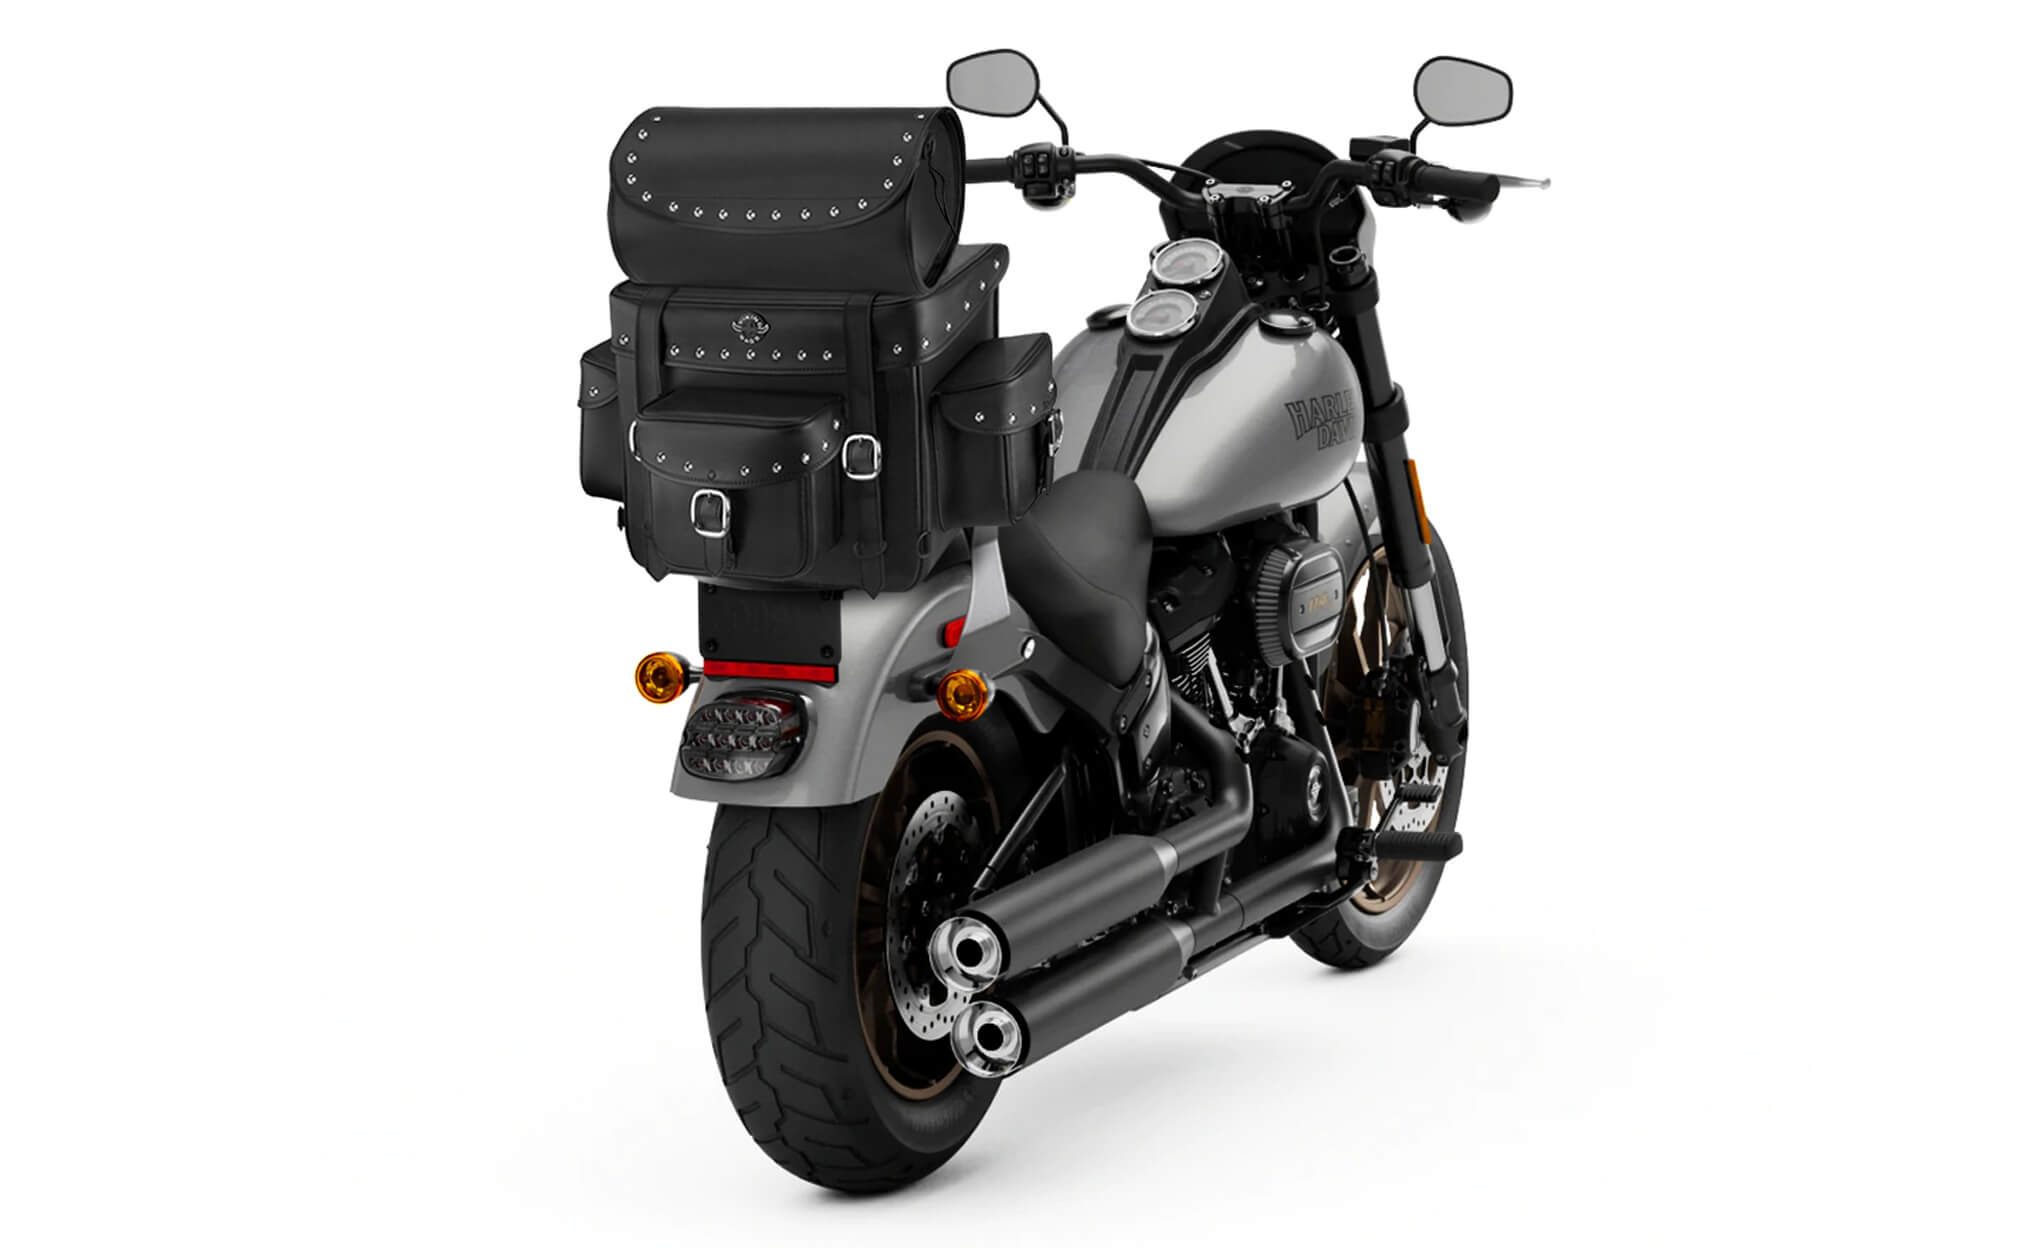 Viking Revival Series Large Triumph Studded Motorcycle Sissy Bar Bag Bag on Bike View @expand